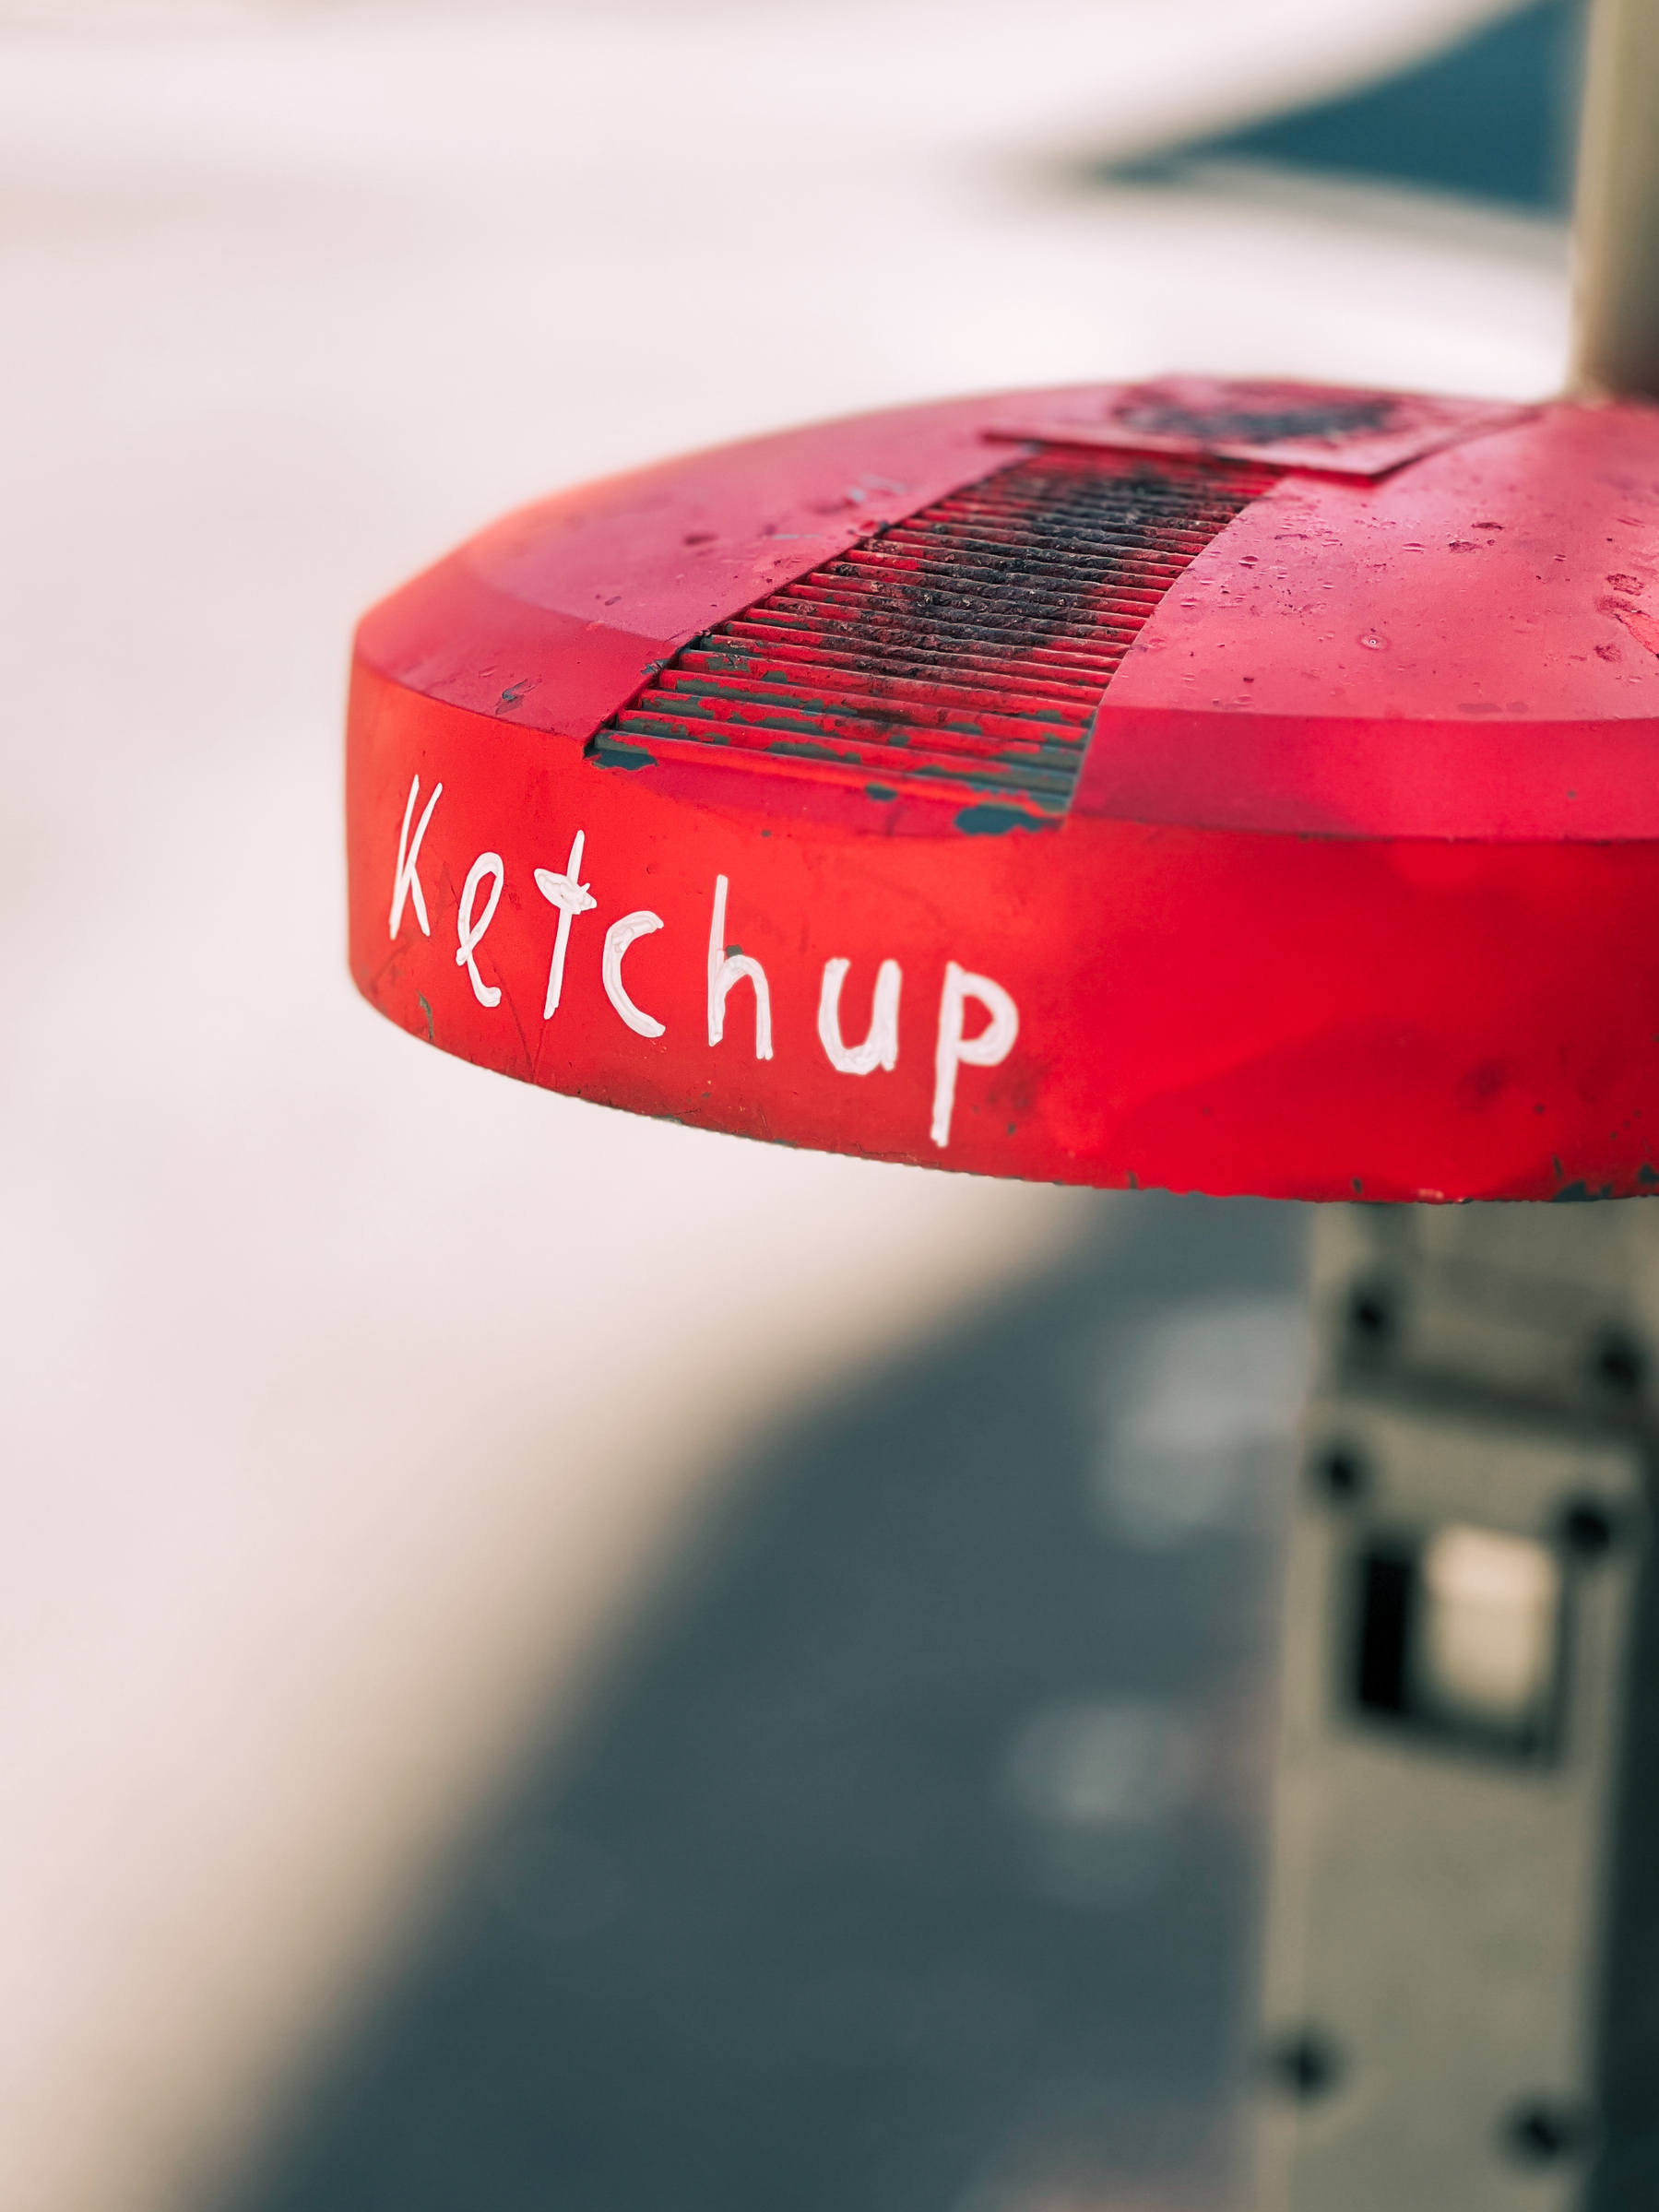 “Ketchup” written on a trash can cover. 